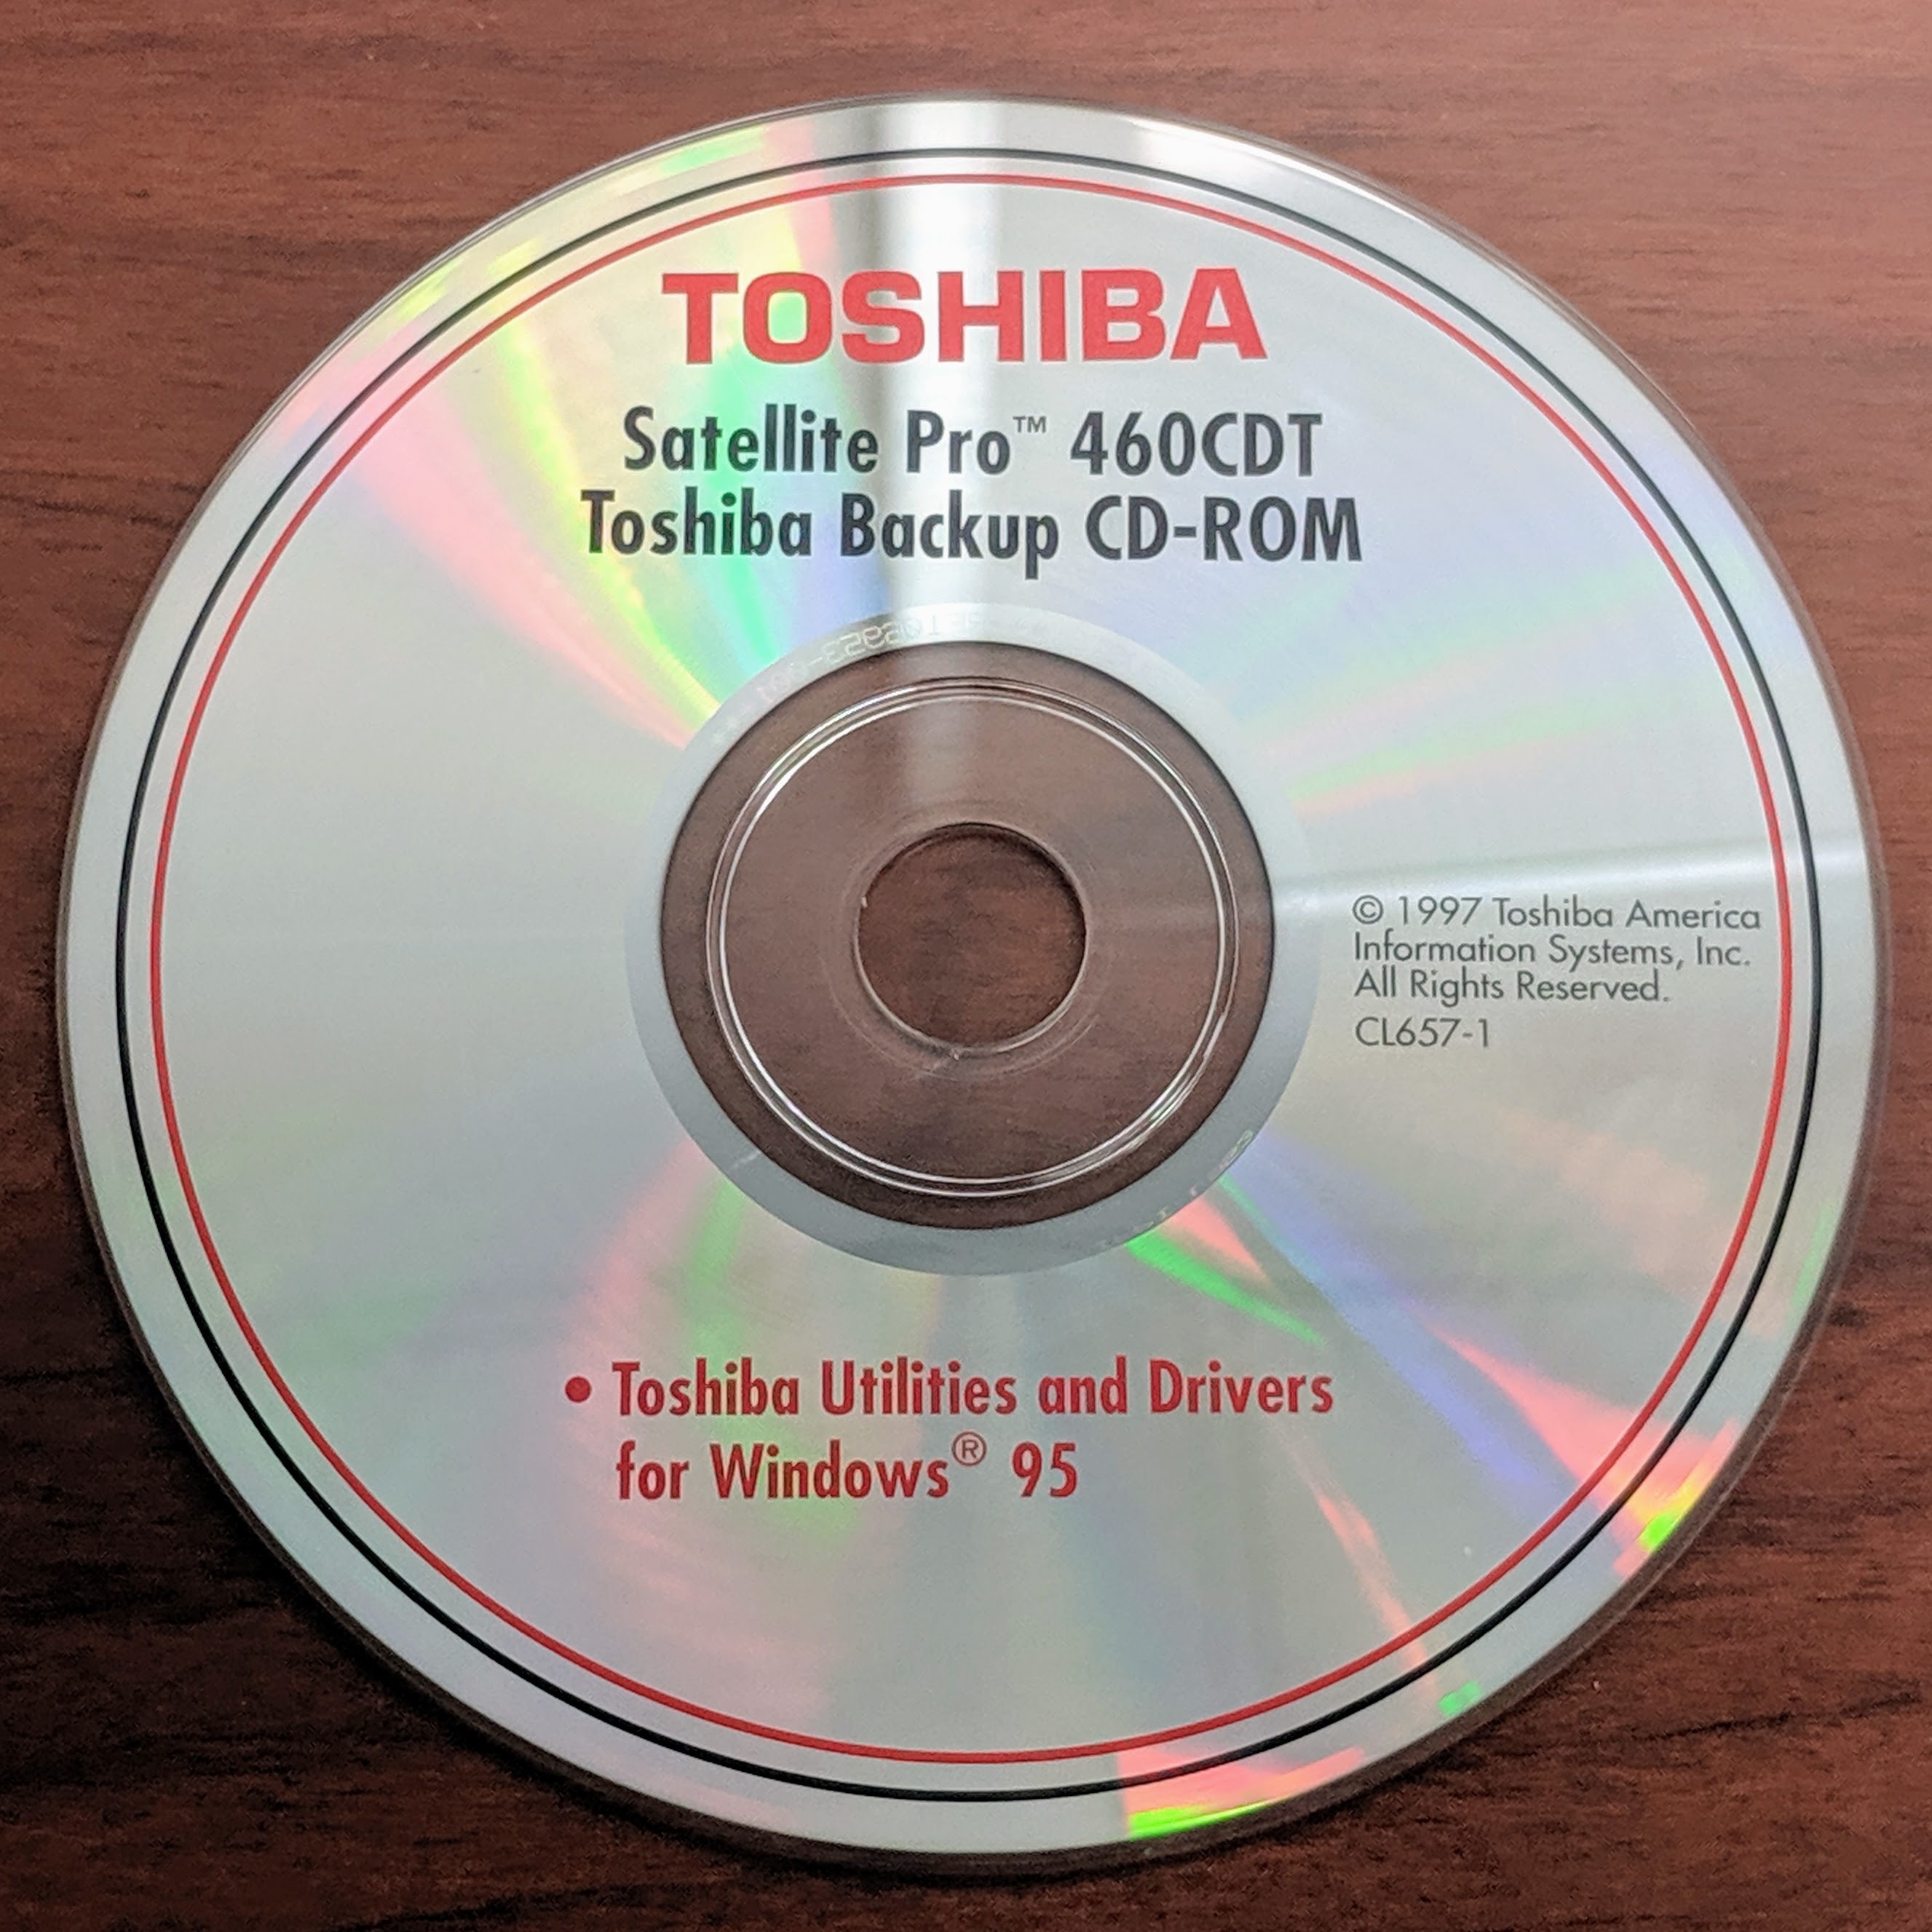 Toshiba Satellite Pro 460CDT Utilities and Drivers CD-ROM CL657-1 